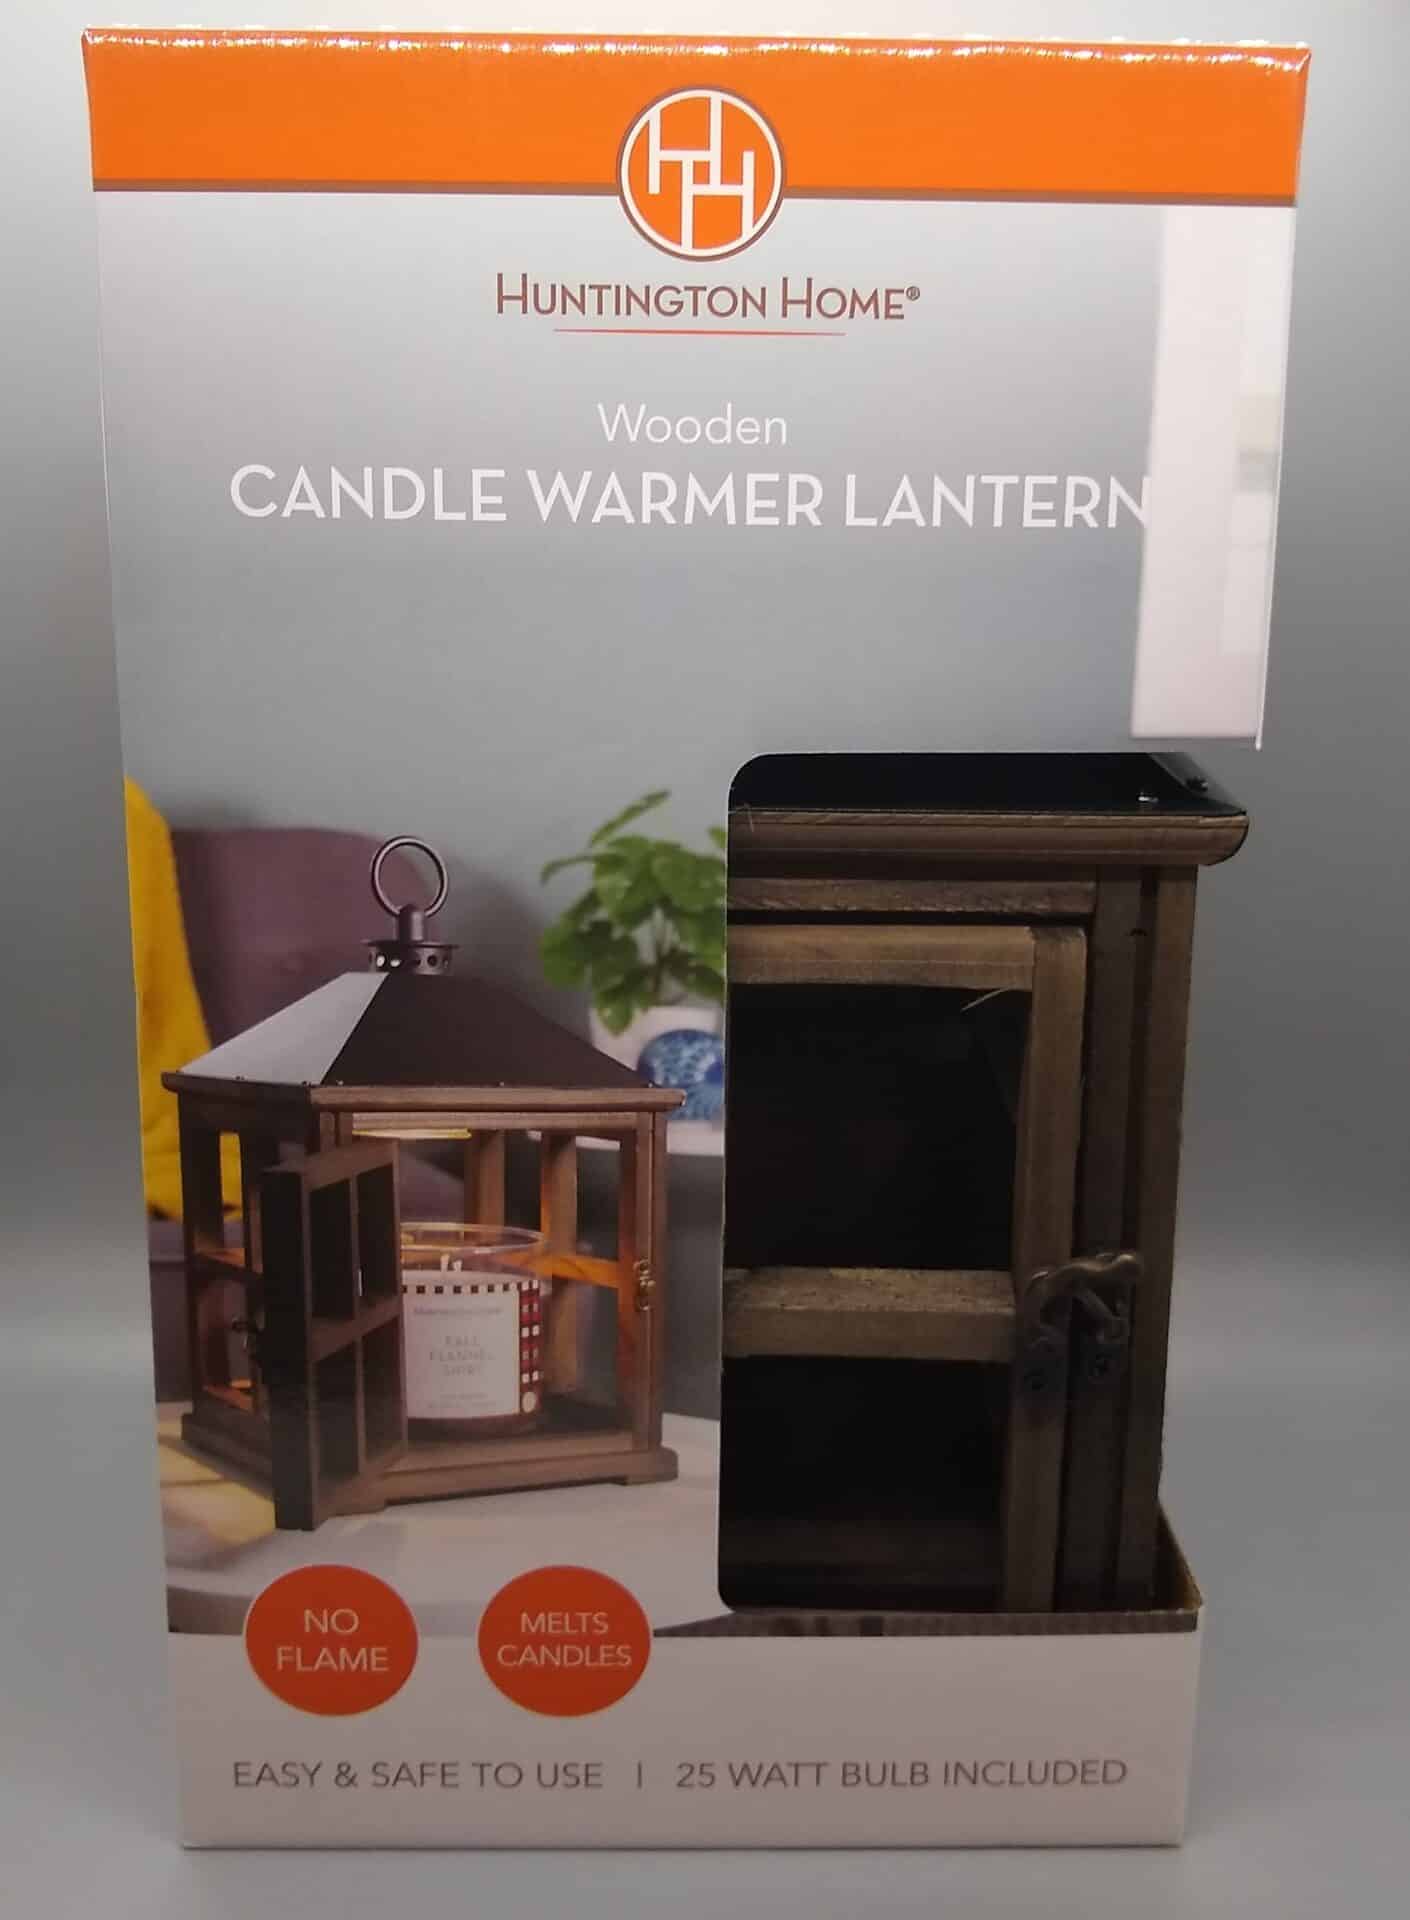 The Huntington Home Wooden Candle Warmer Lantern